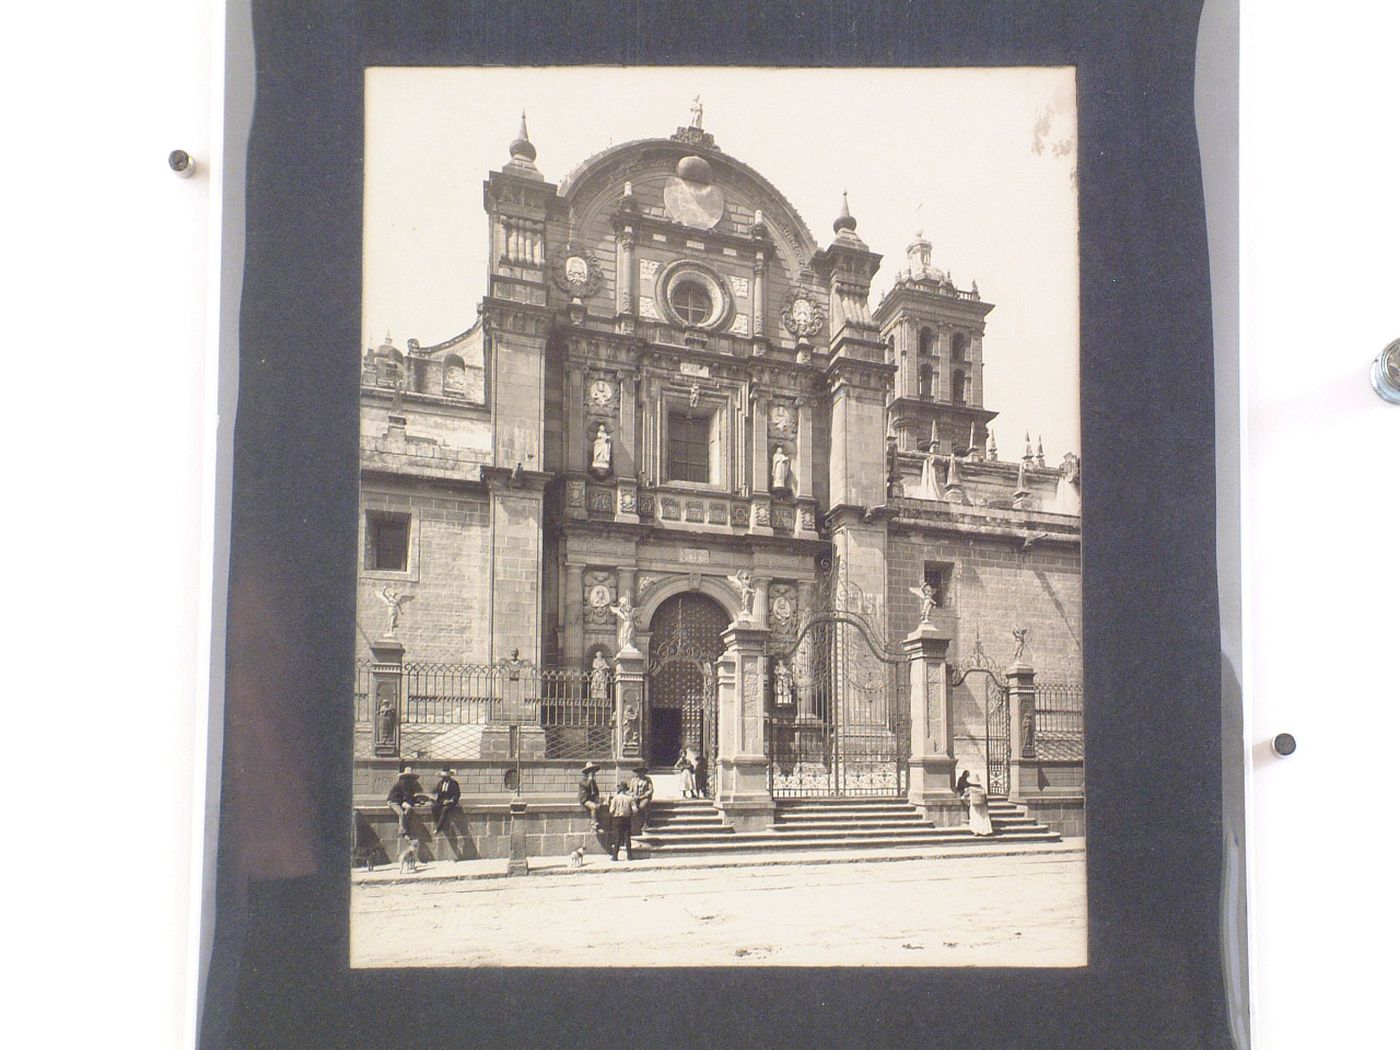 View of the northern façade of the Catedral de Puebla showing a gateway and part of the fence surrounding the atrio with people in the foreground, Mexico